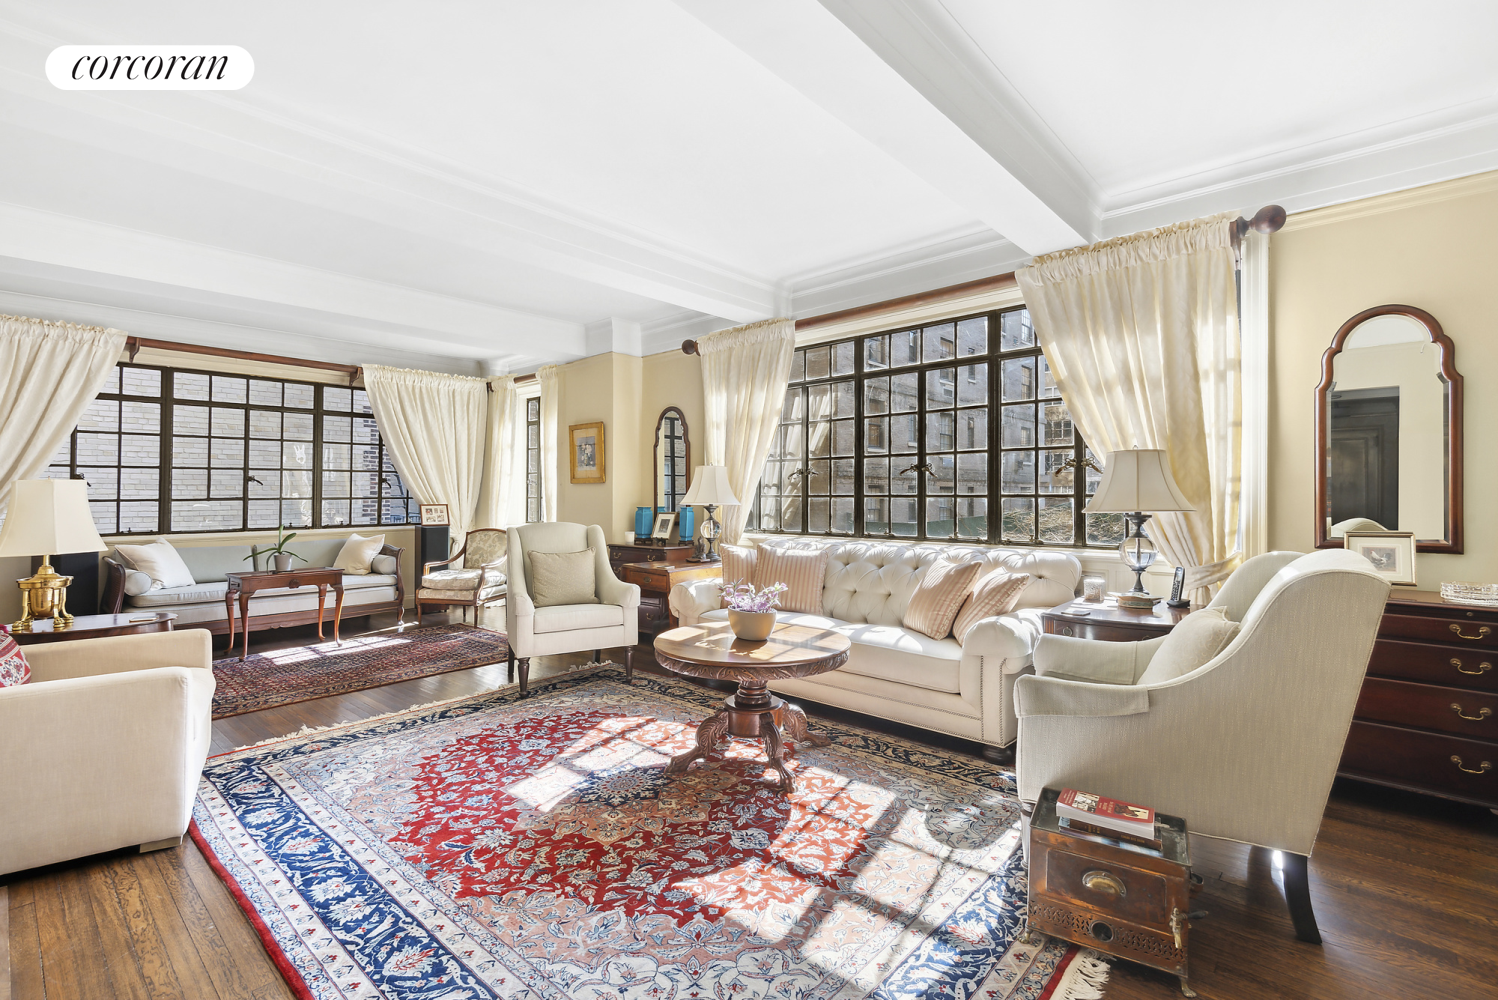 530 East 86th Street 3A, Yorkville, Upper East Side, NYC - 3 Bedrooms  
2 Bathrooms  
6 Rooms - 